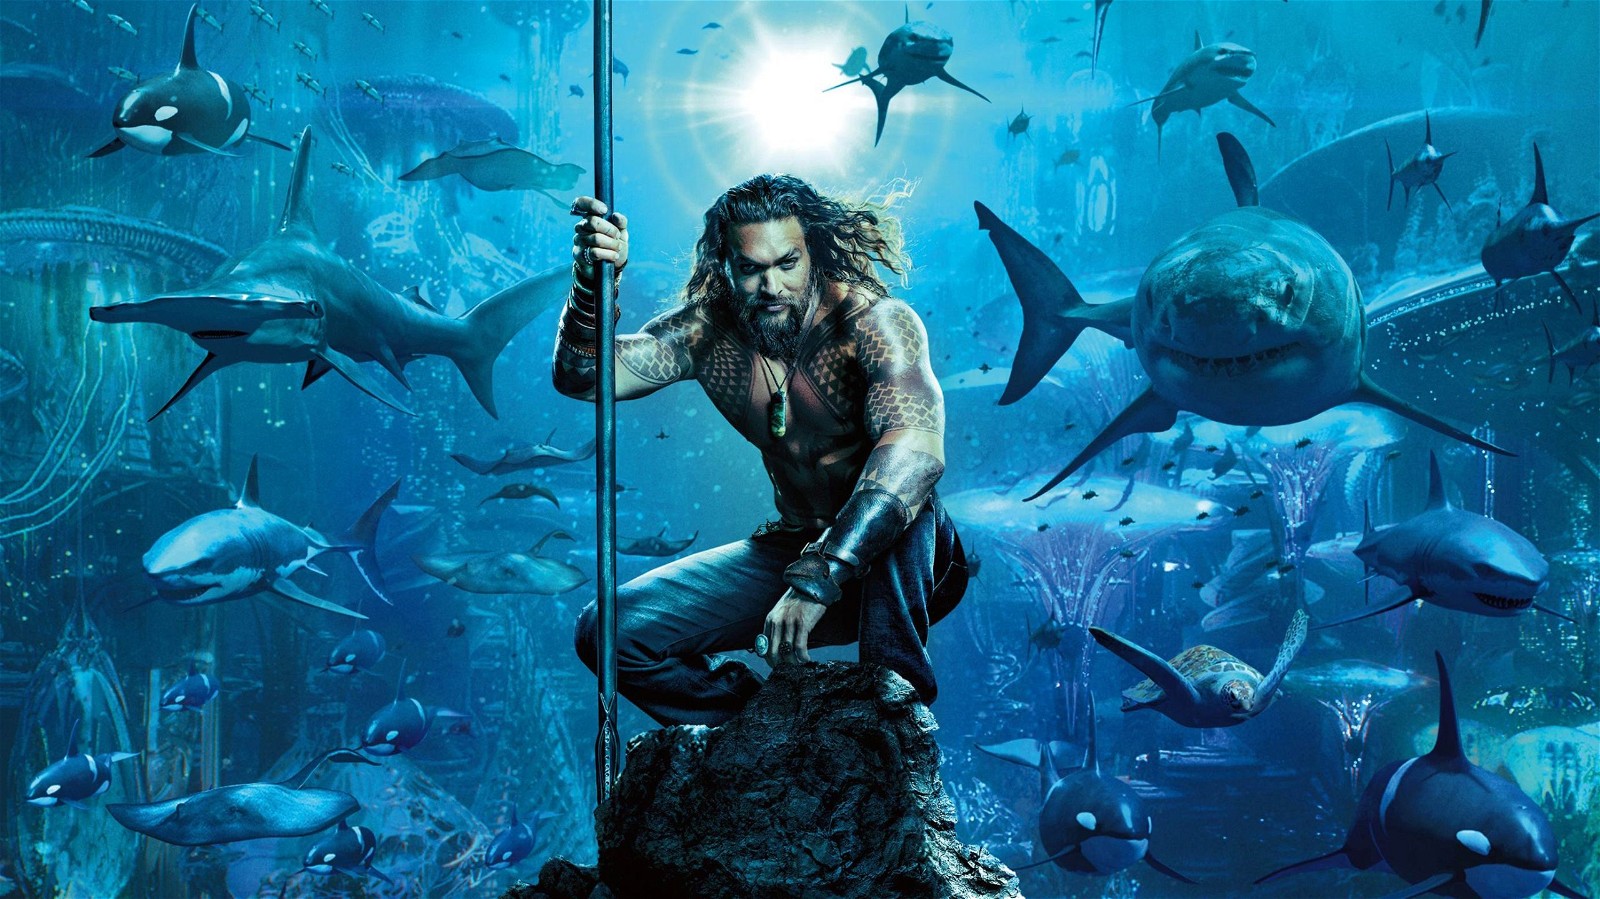 A glimpse from Aquaman